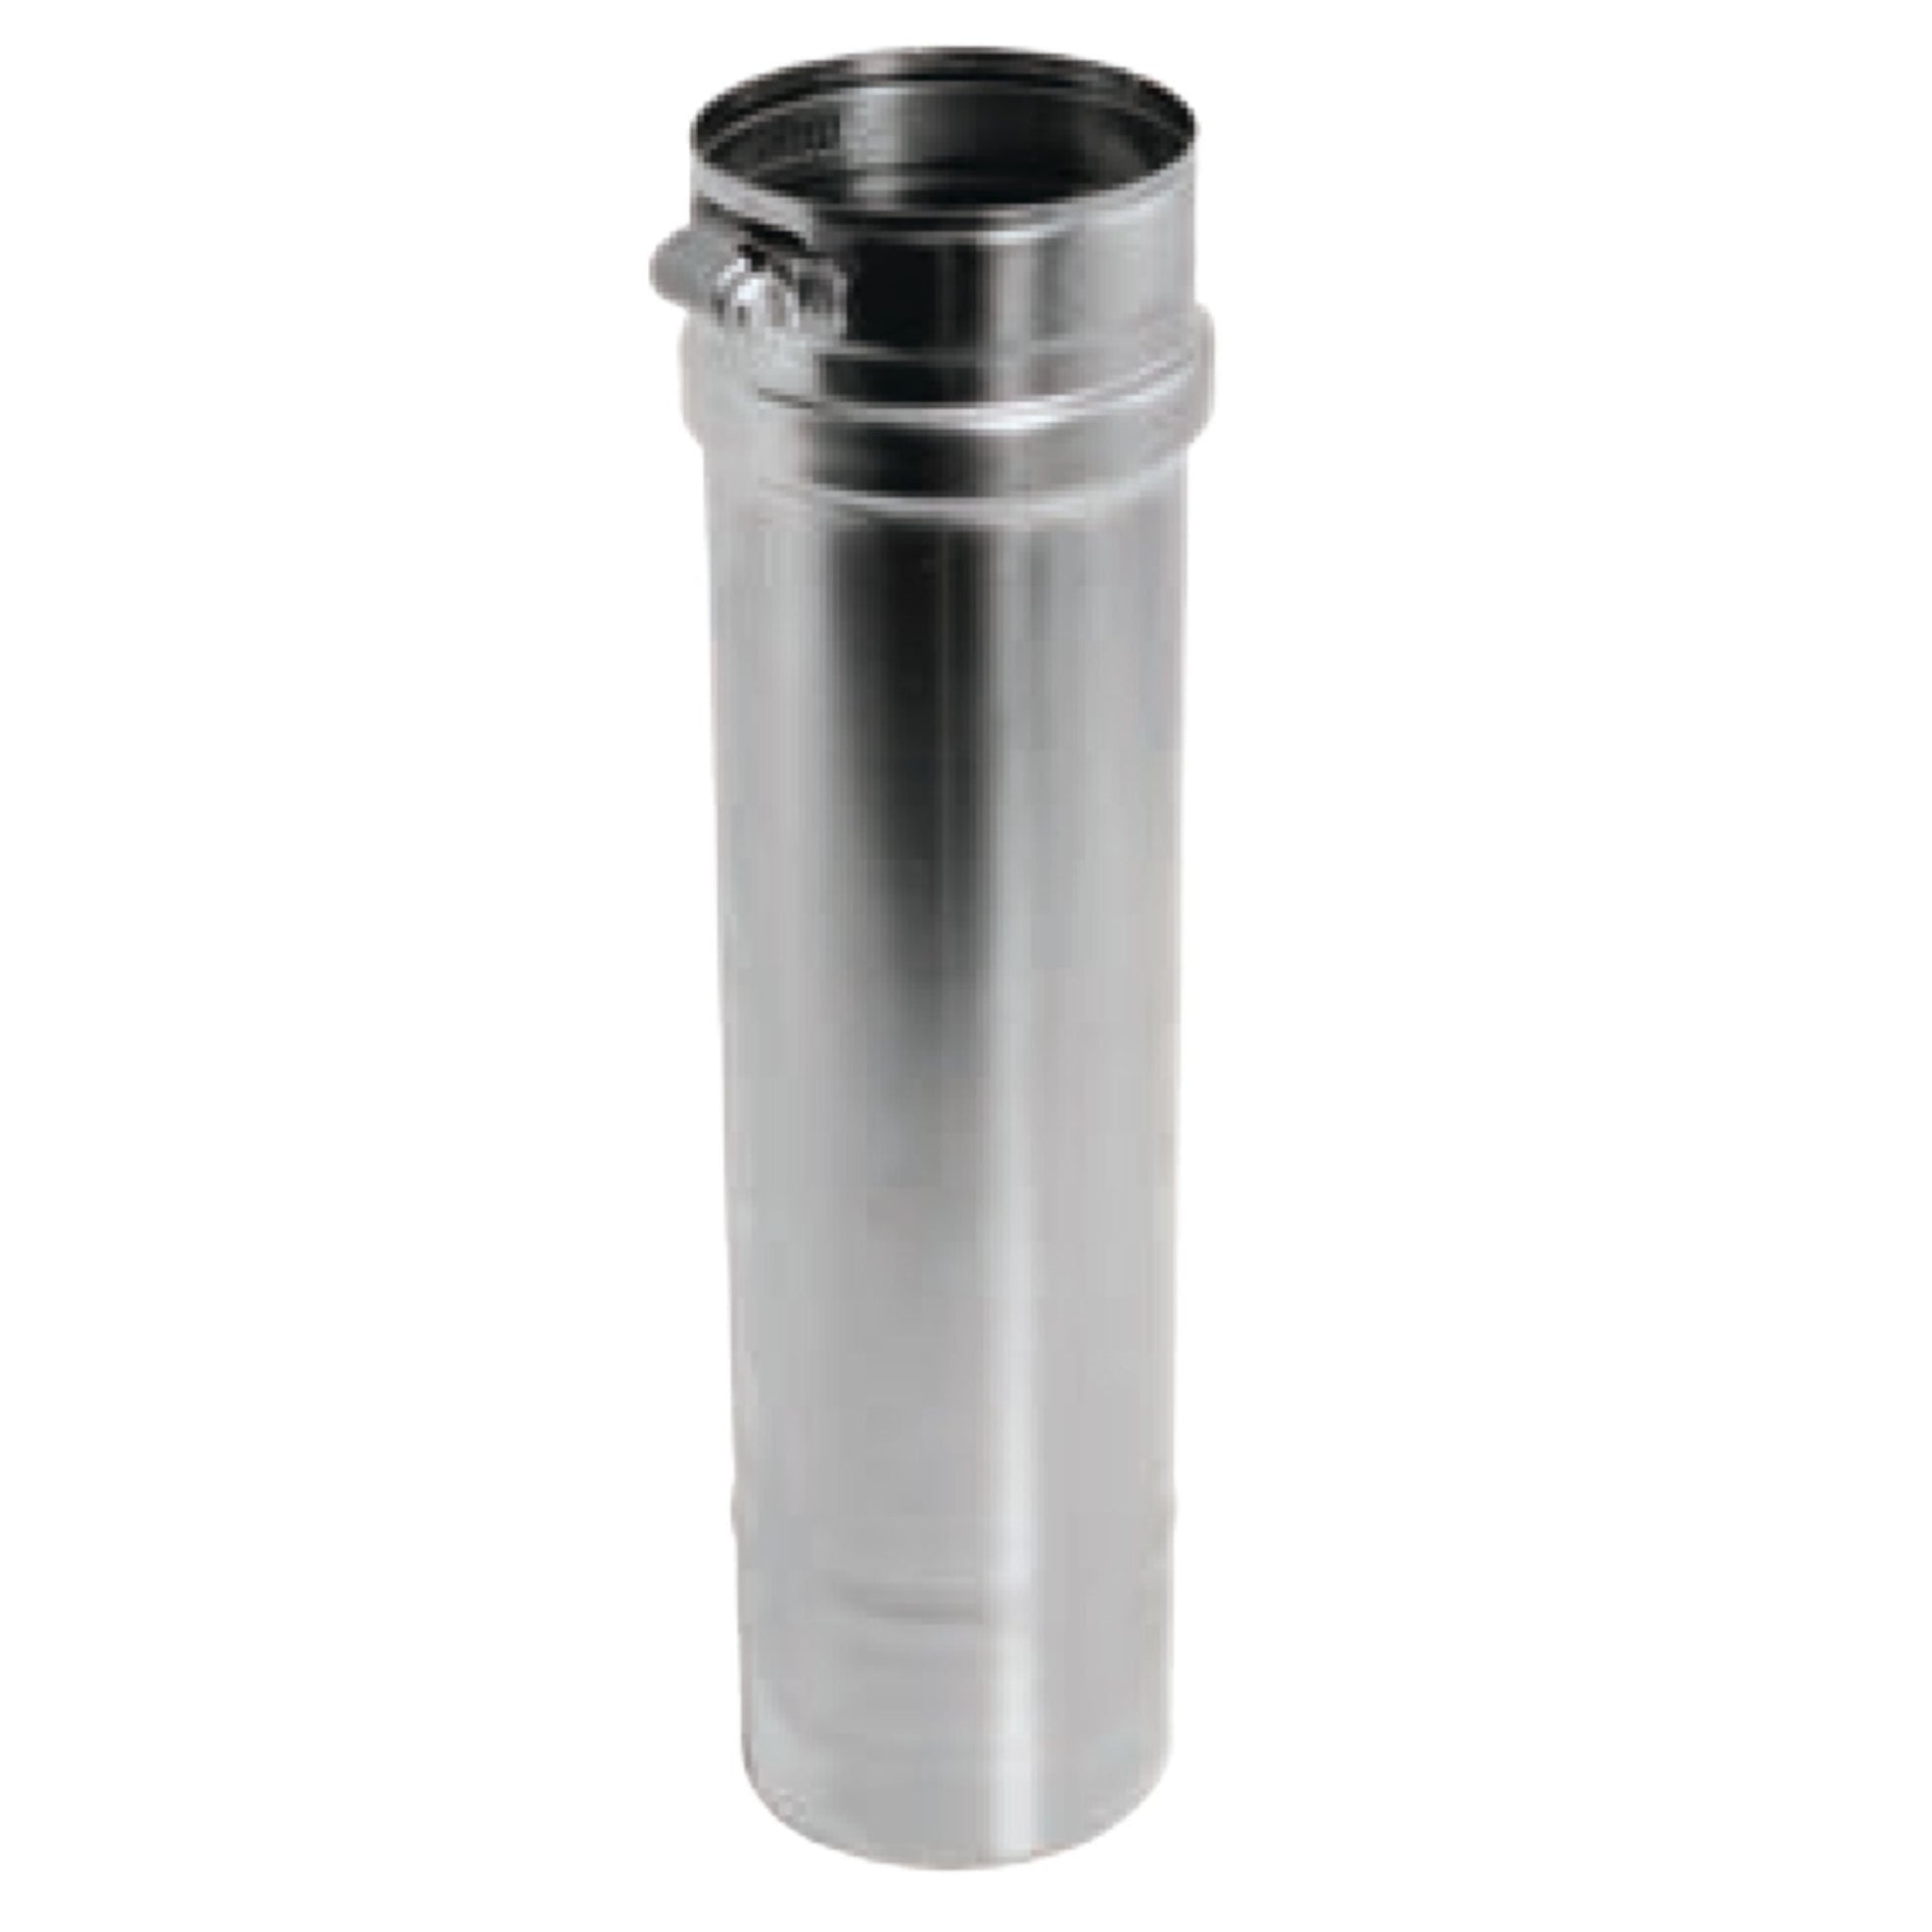 DuraVent FasNSeal 4" x 18" 316L Stainless Steel Vent Length